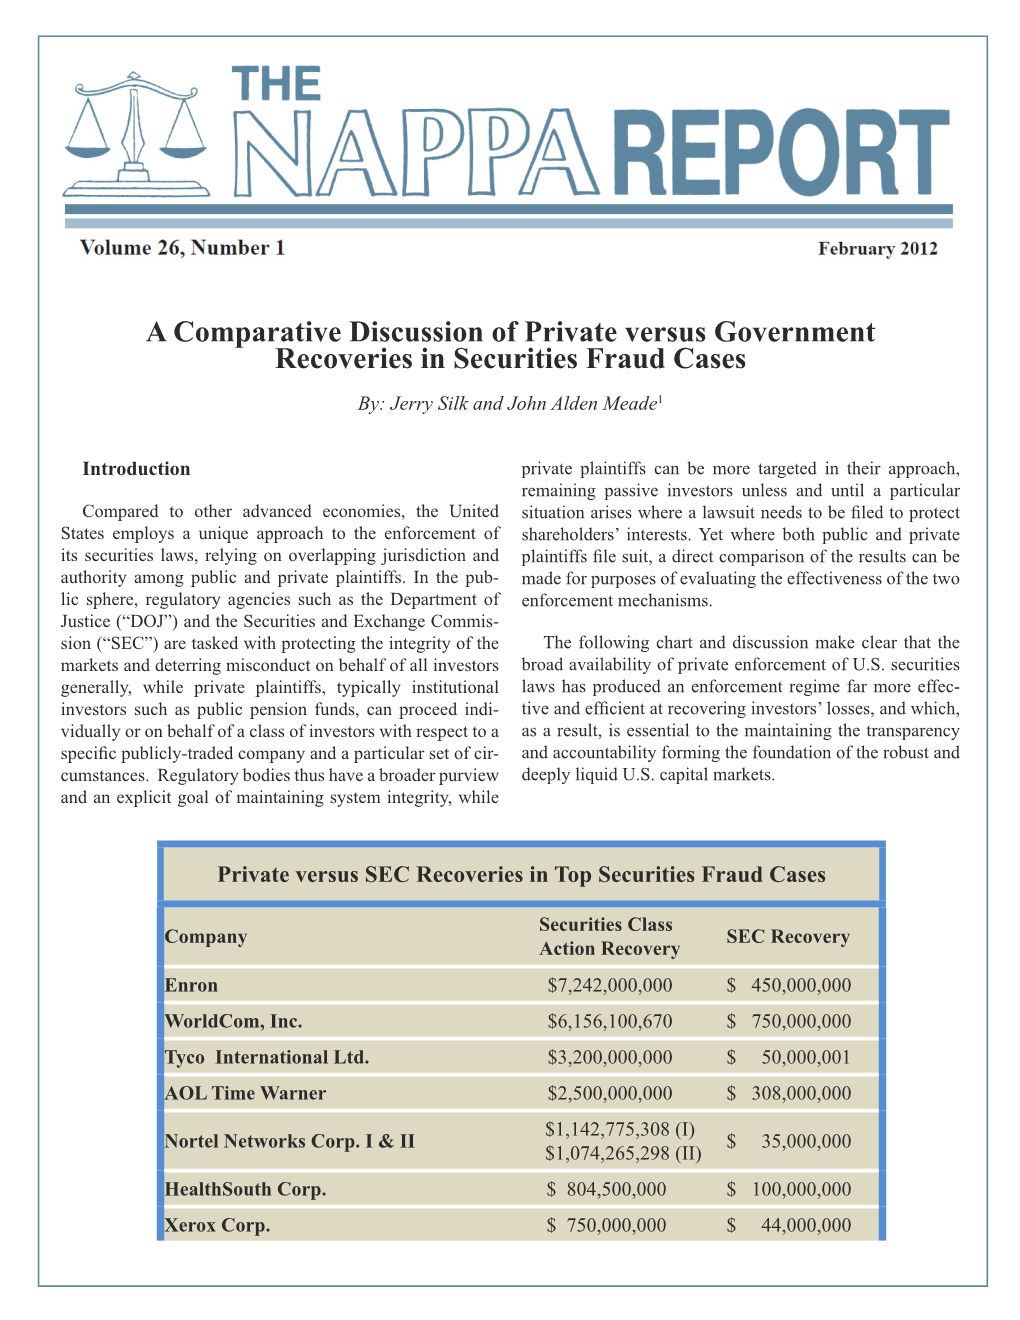 A Comparative Discussion of Private Versus Government Recoveries in Securities Fraud Cases By: Jerry Silk and John Alden Meade1